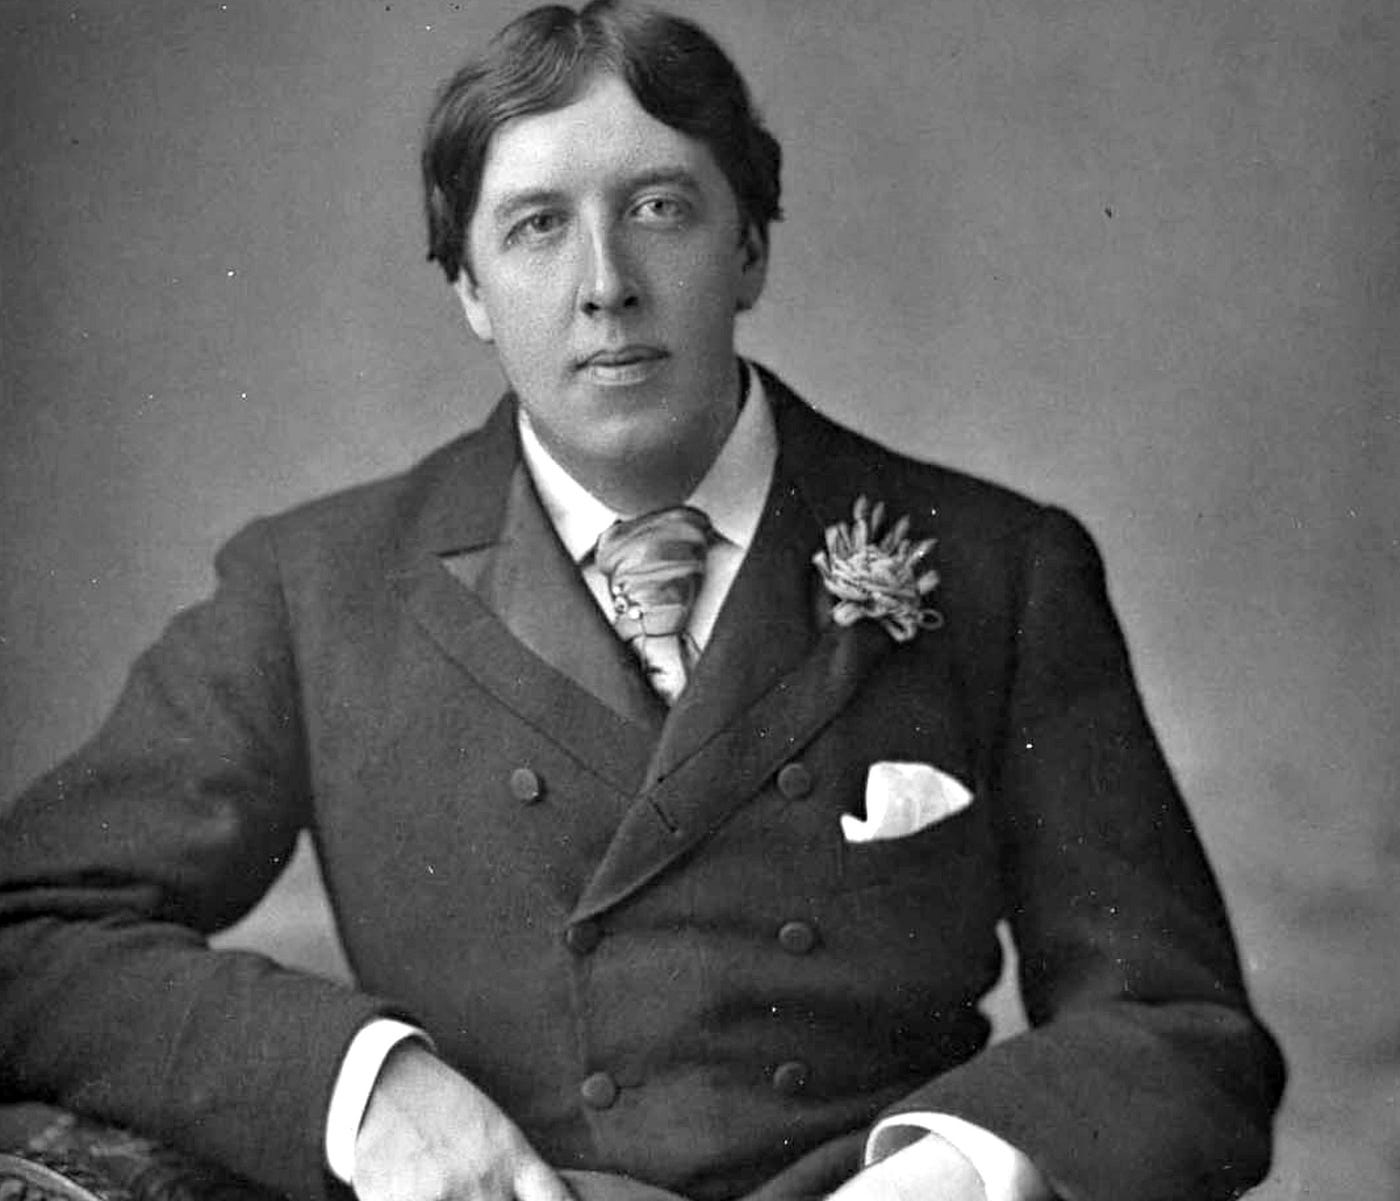 Oscar Wilde: The 2 Tragedies of Life, by Thomas Oppong